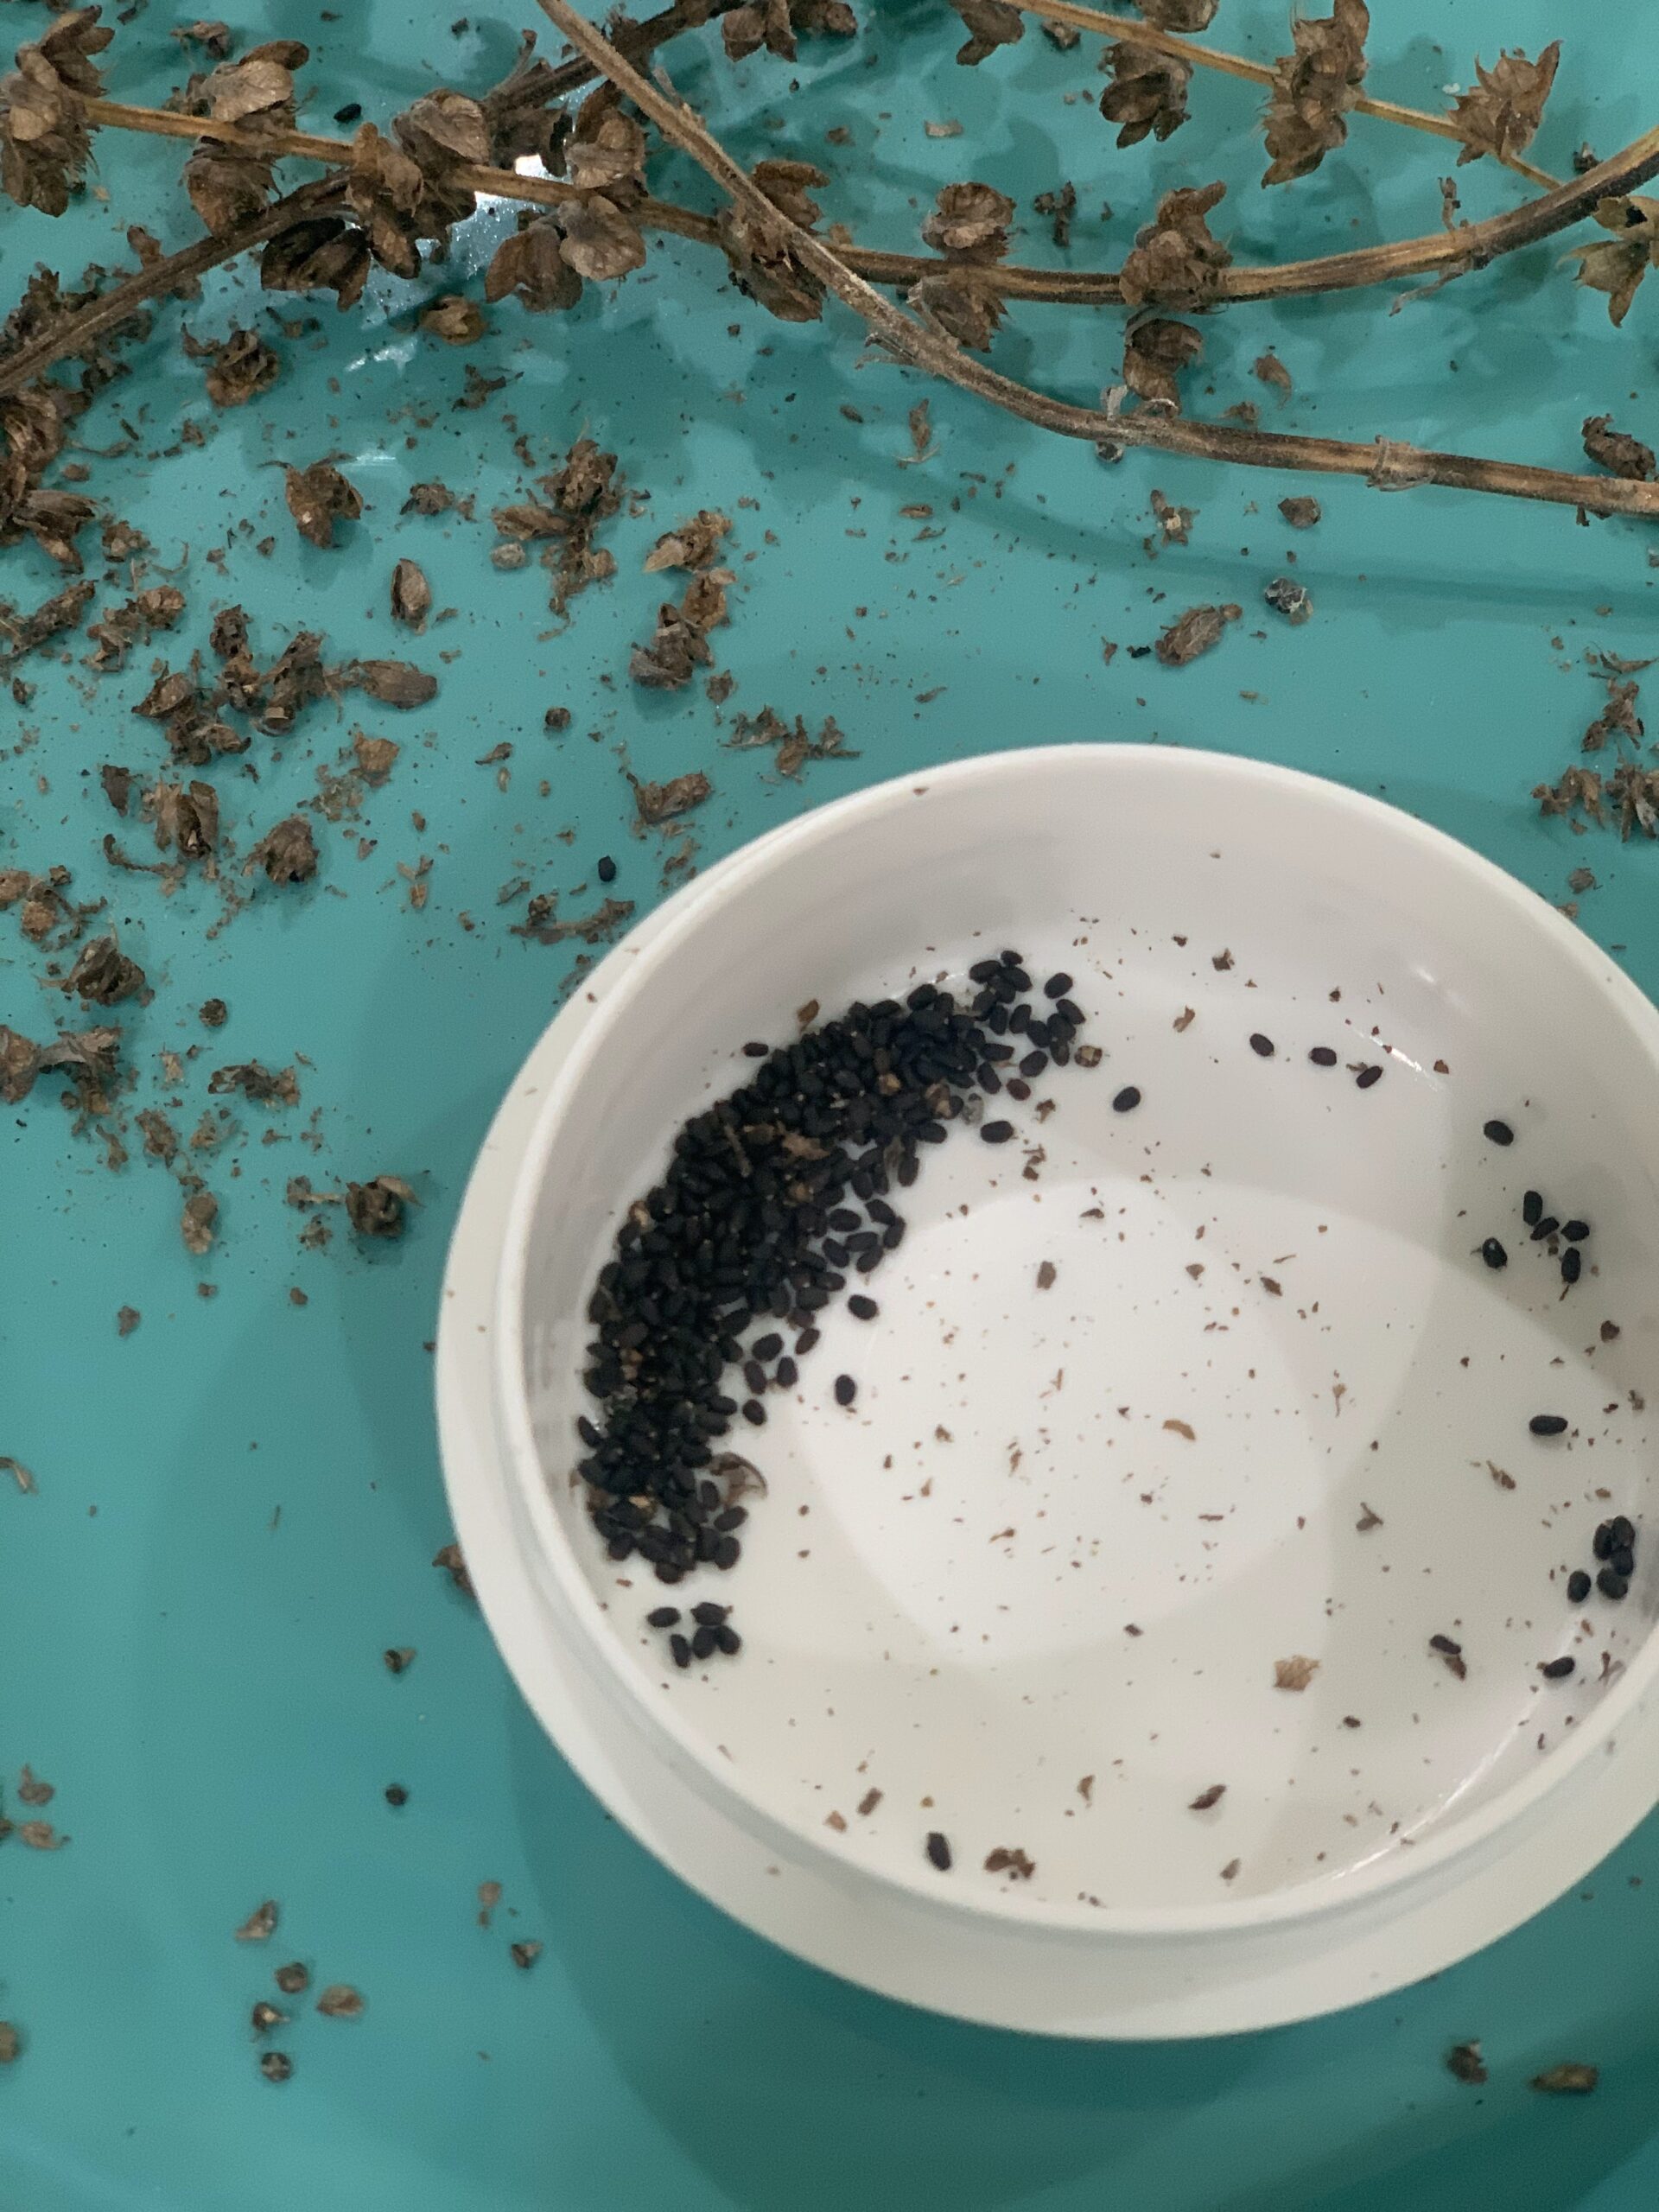 Basil Seeds in Container